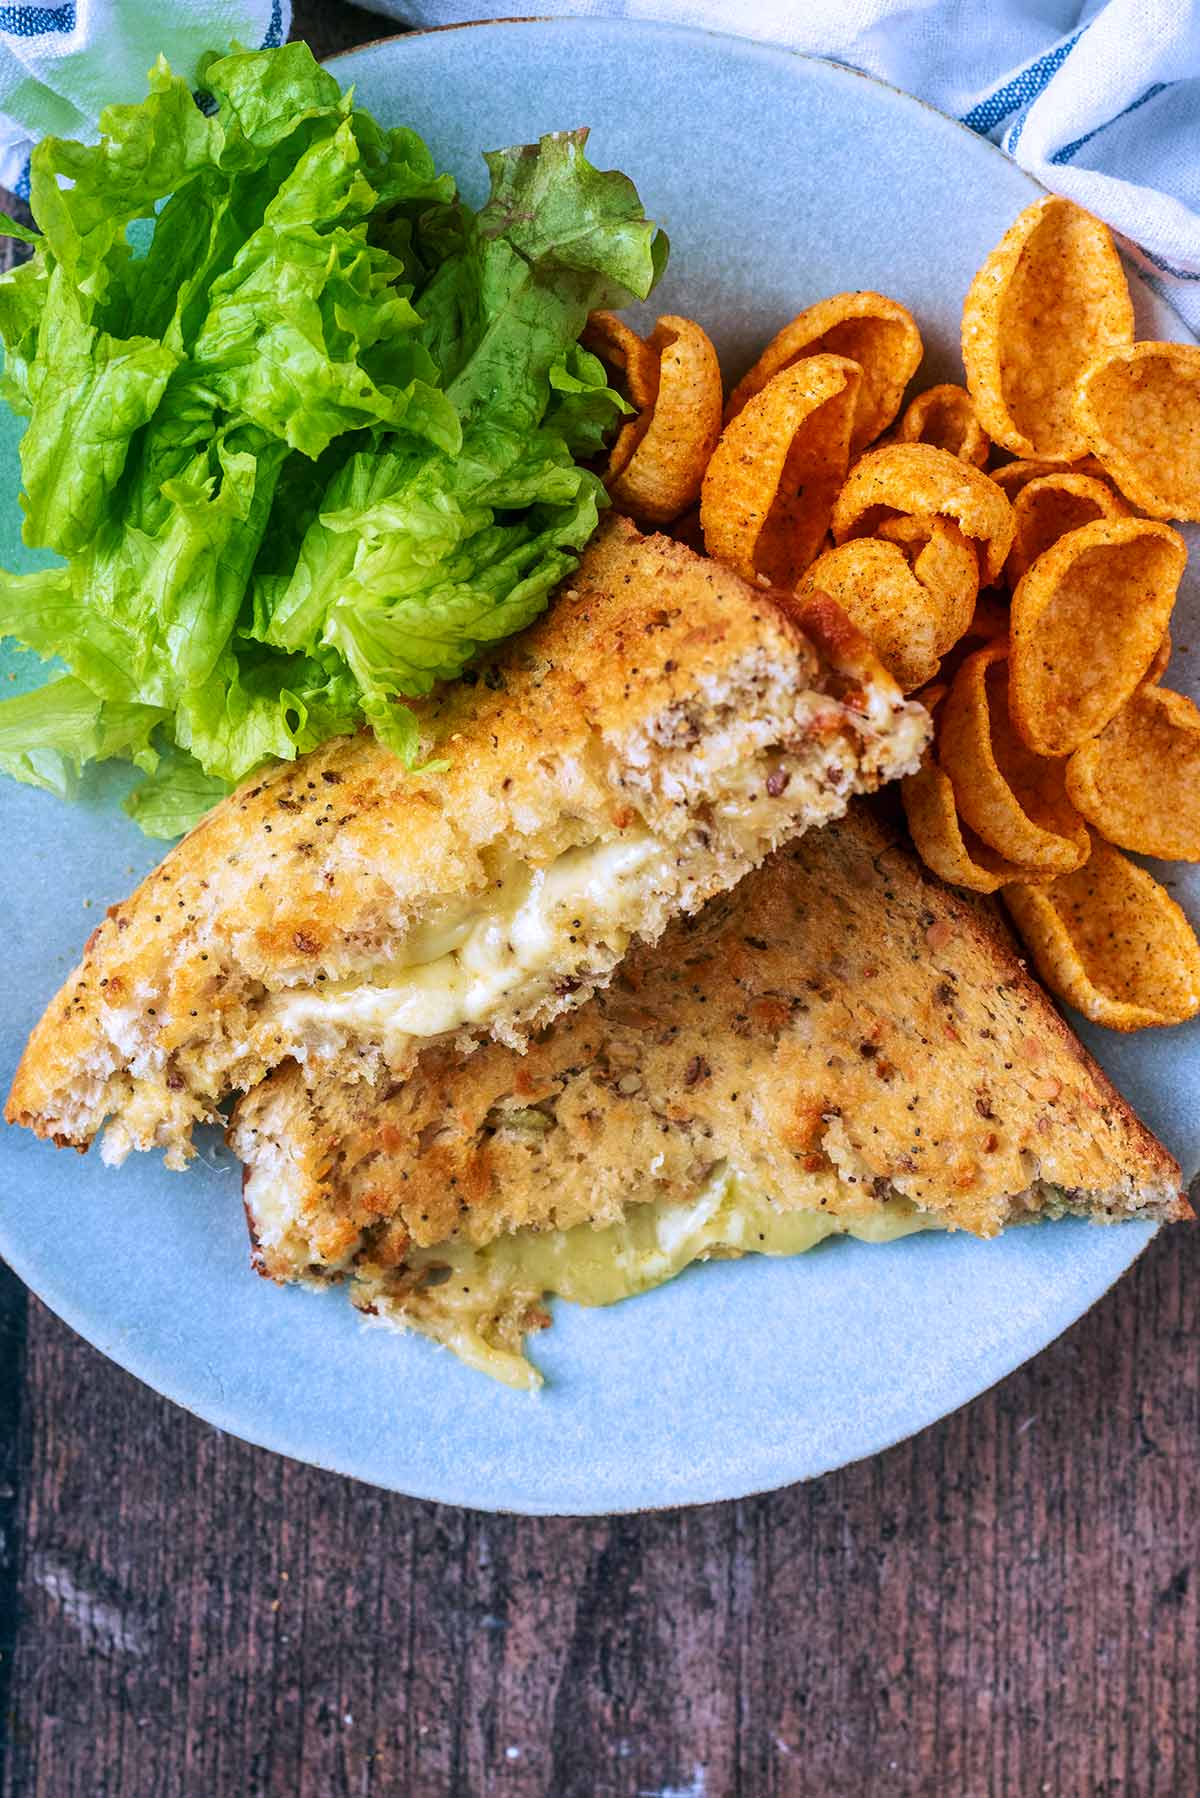 A toasted cheese sandwich cut in half on a plate with crisps and lettuce.